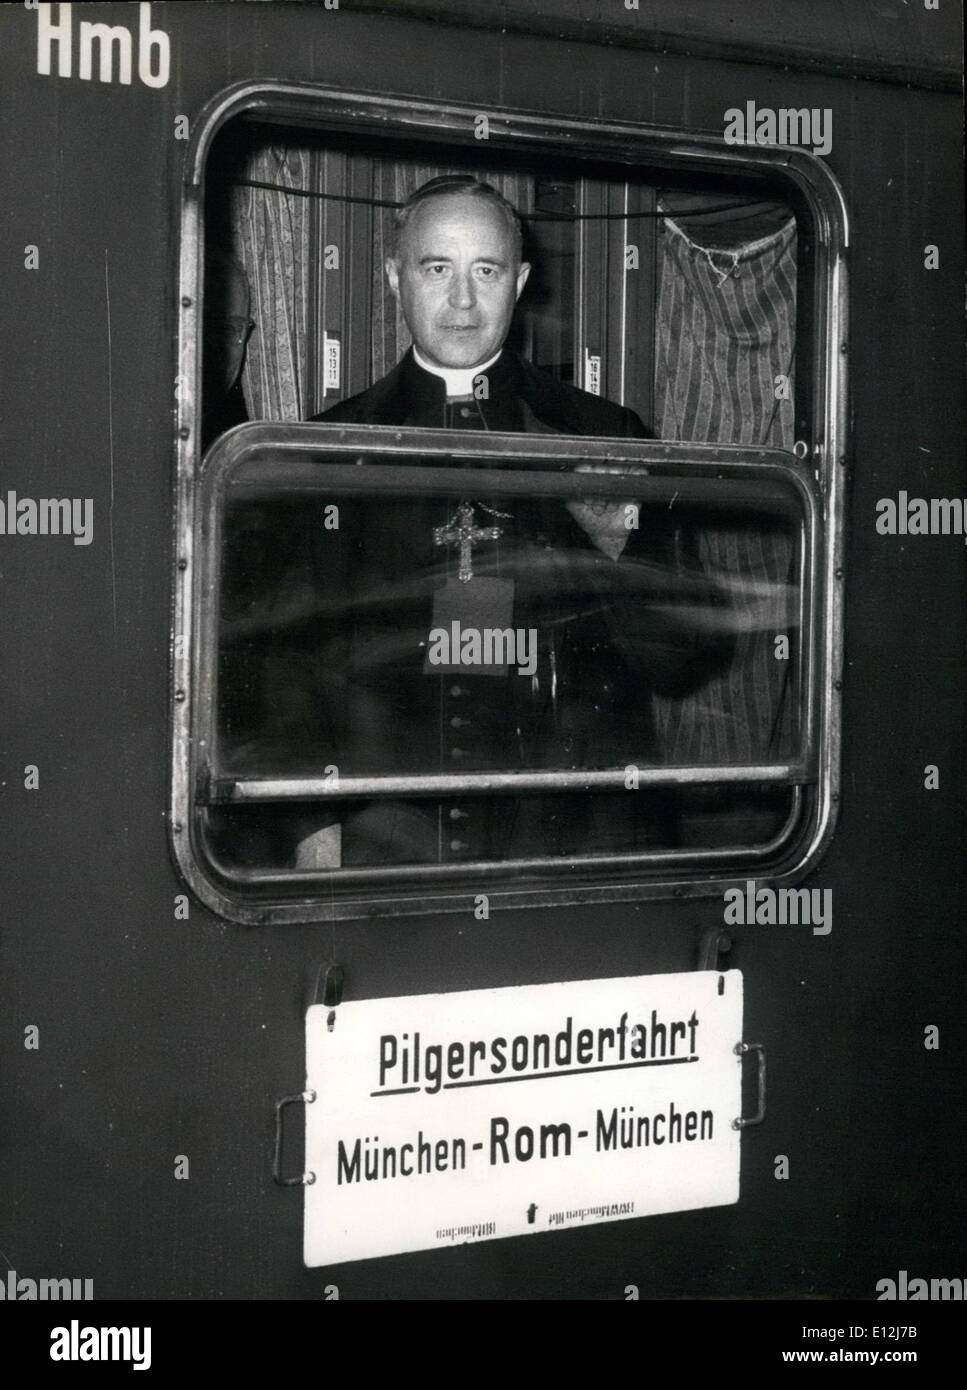 Feb. 24, 2012 - German Cardinal Wendel on way to Rome for conclave.: The German Cardinal Joseph Wendel, Acrhbishop of Munich-Freising entered on October 12th,1958 the pilgrim-train to Rome at 14,45 hours Munich main-station to participate on the election of the new Pope, picture show the Cardinal in the train. Stock Photo